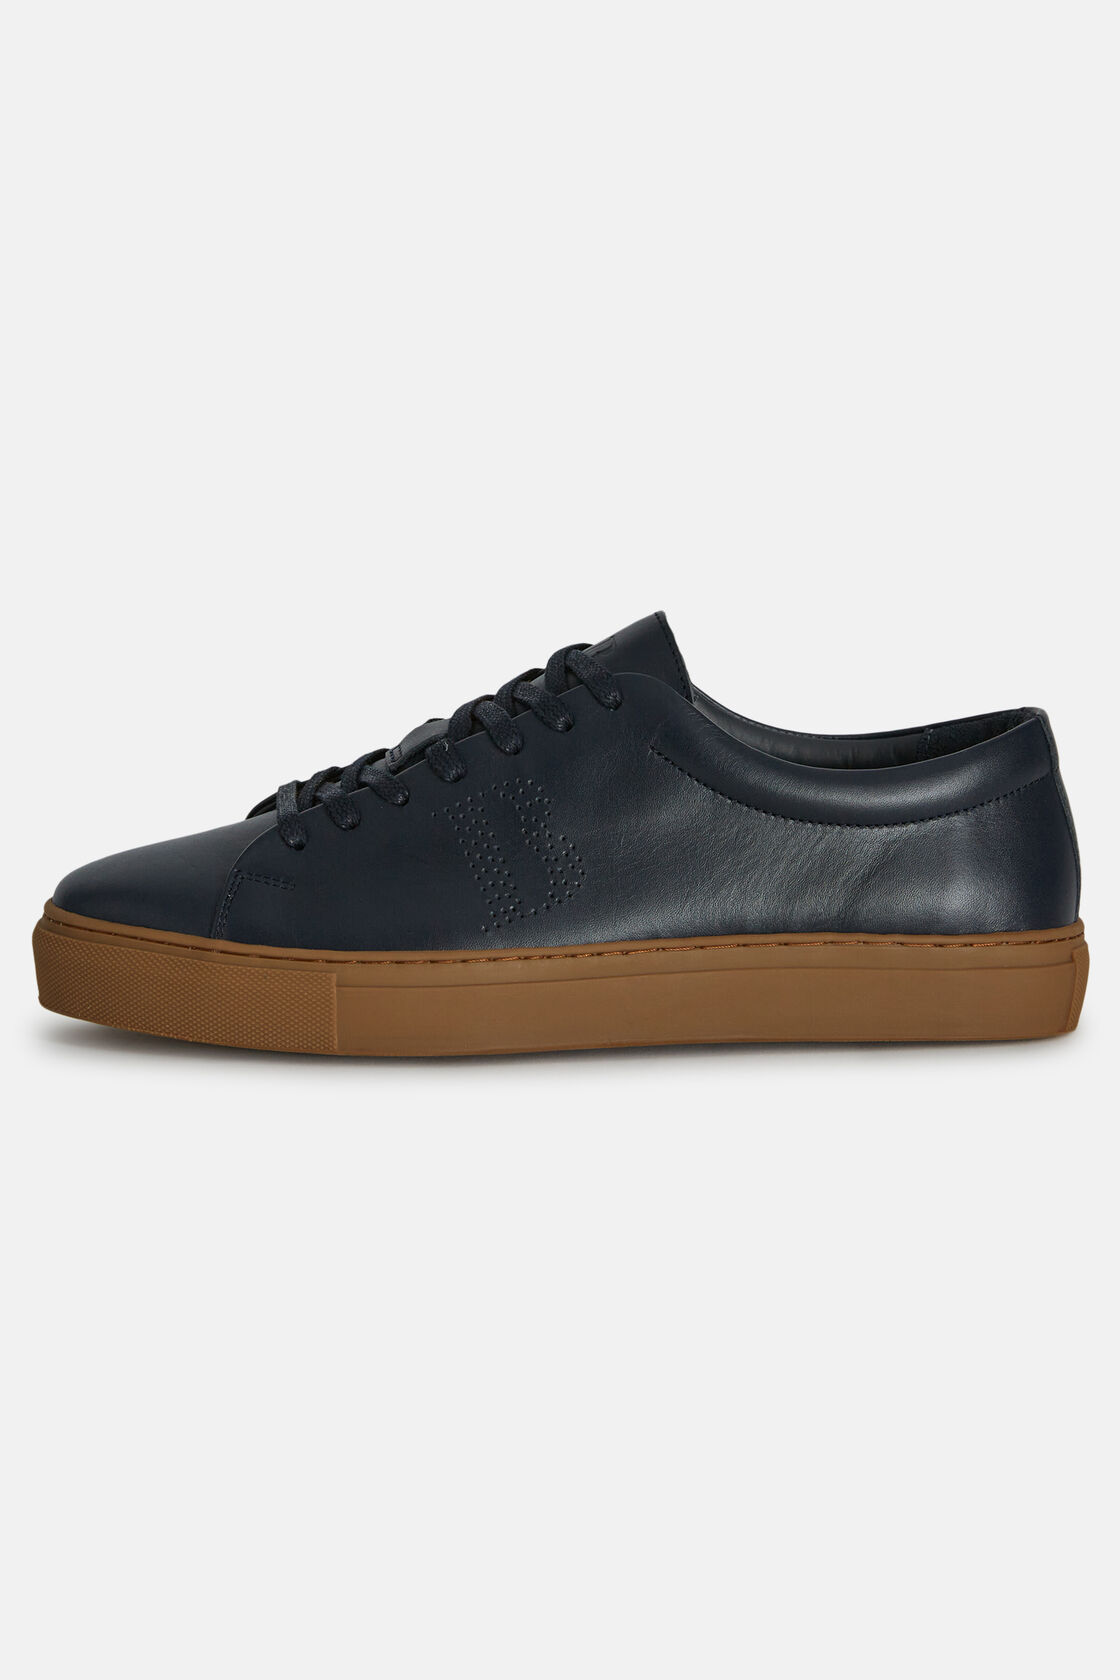 Navy Leather Trainers With Logo, Navy blue, hi-res